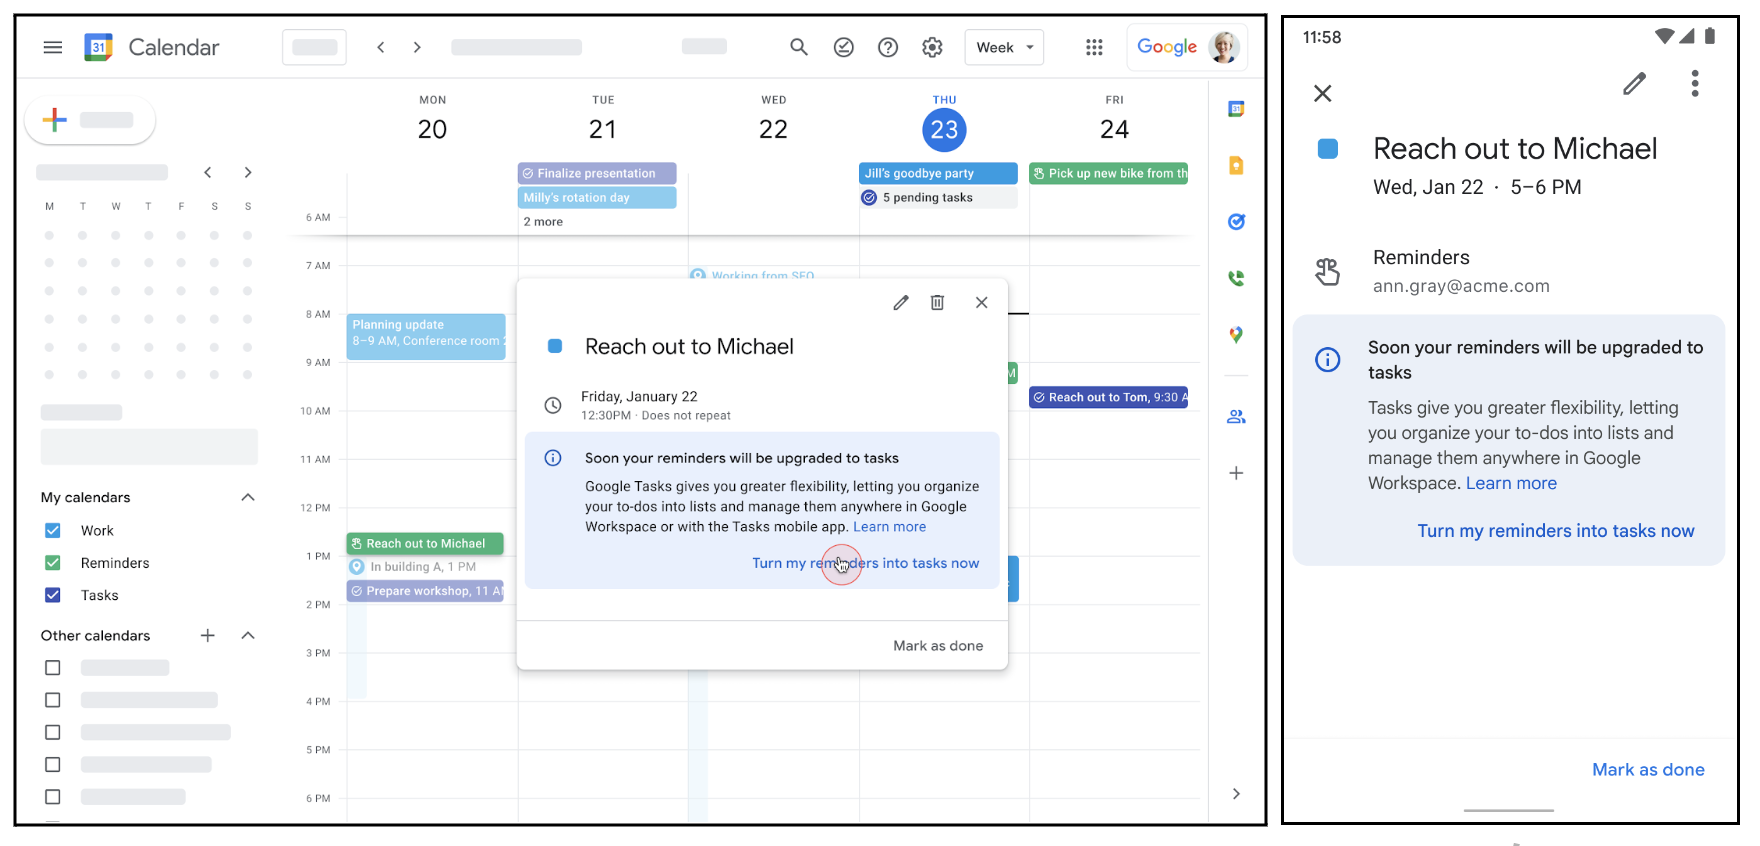 Google Workspace Updates: New Google Groups now generally available